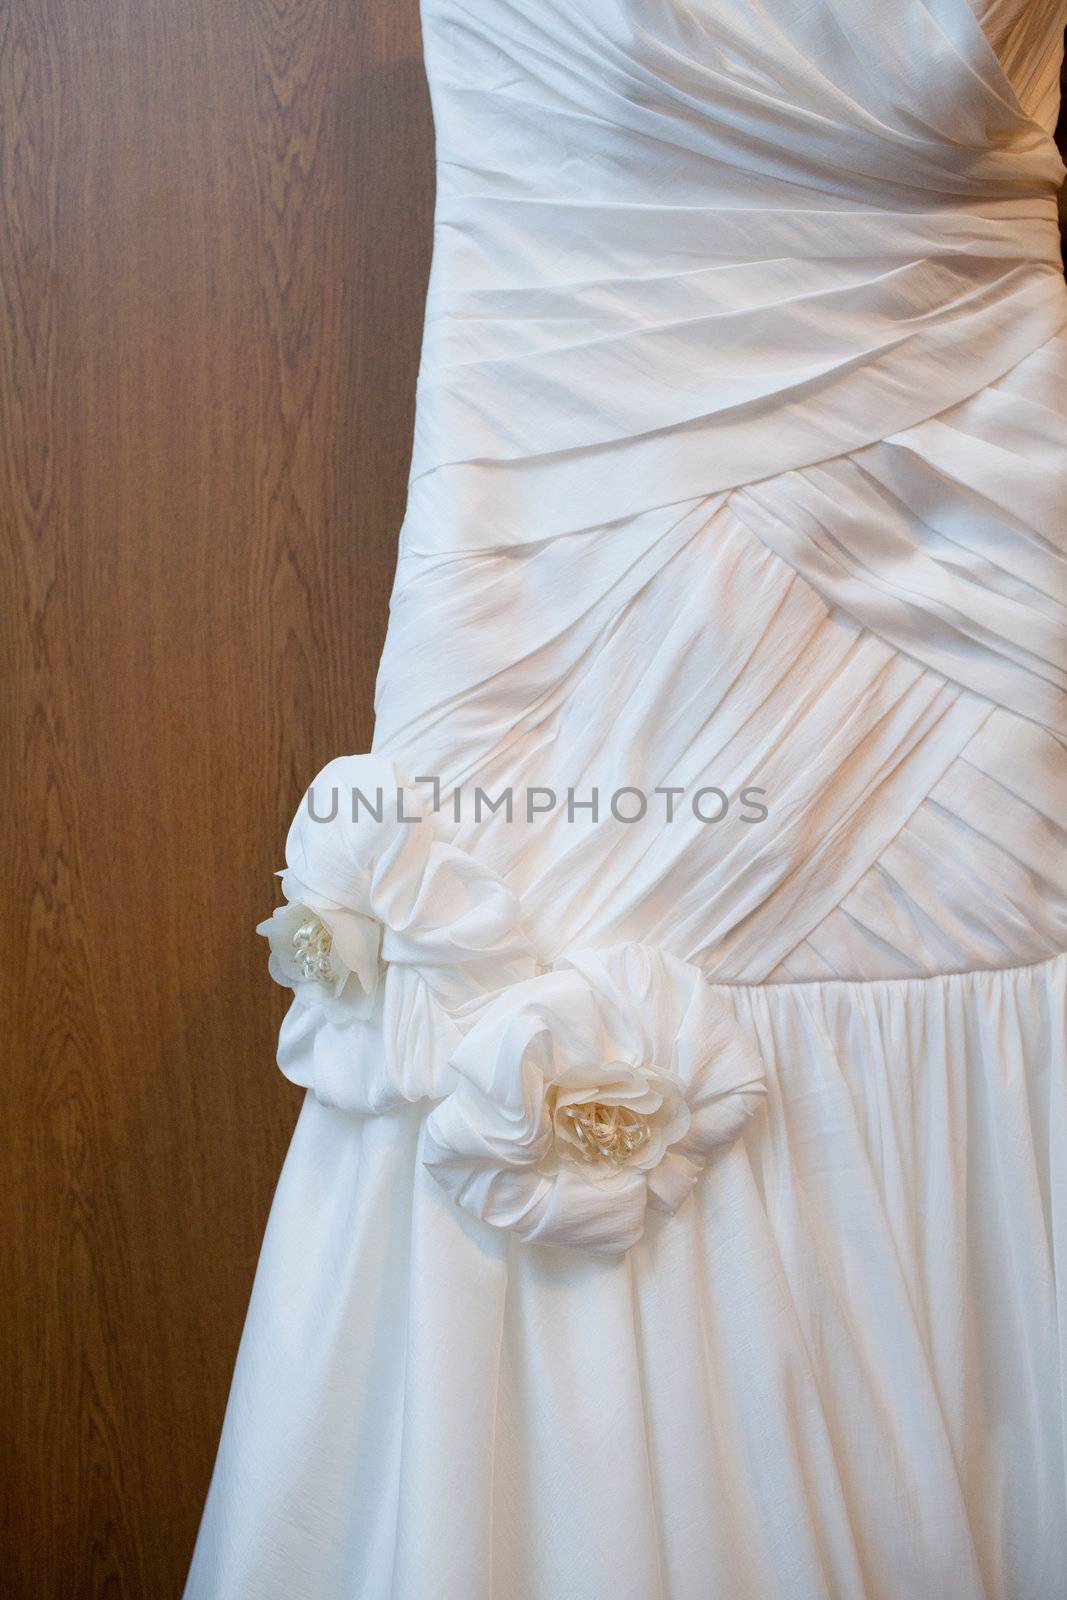 part of a wedding dress with artificial flowers